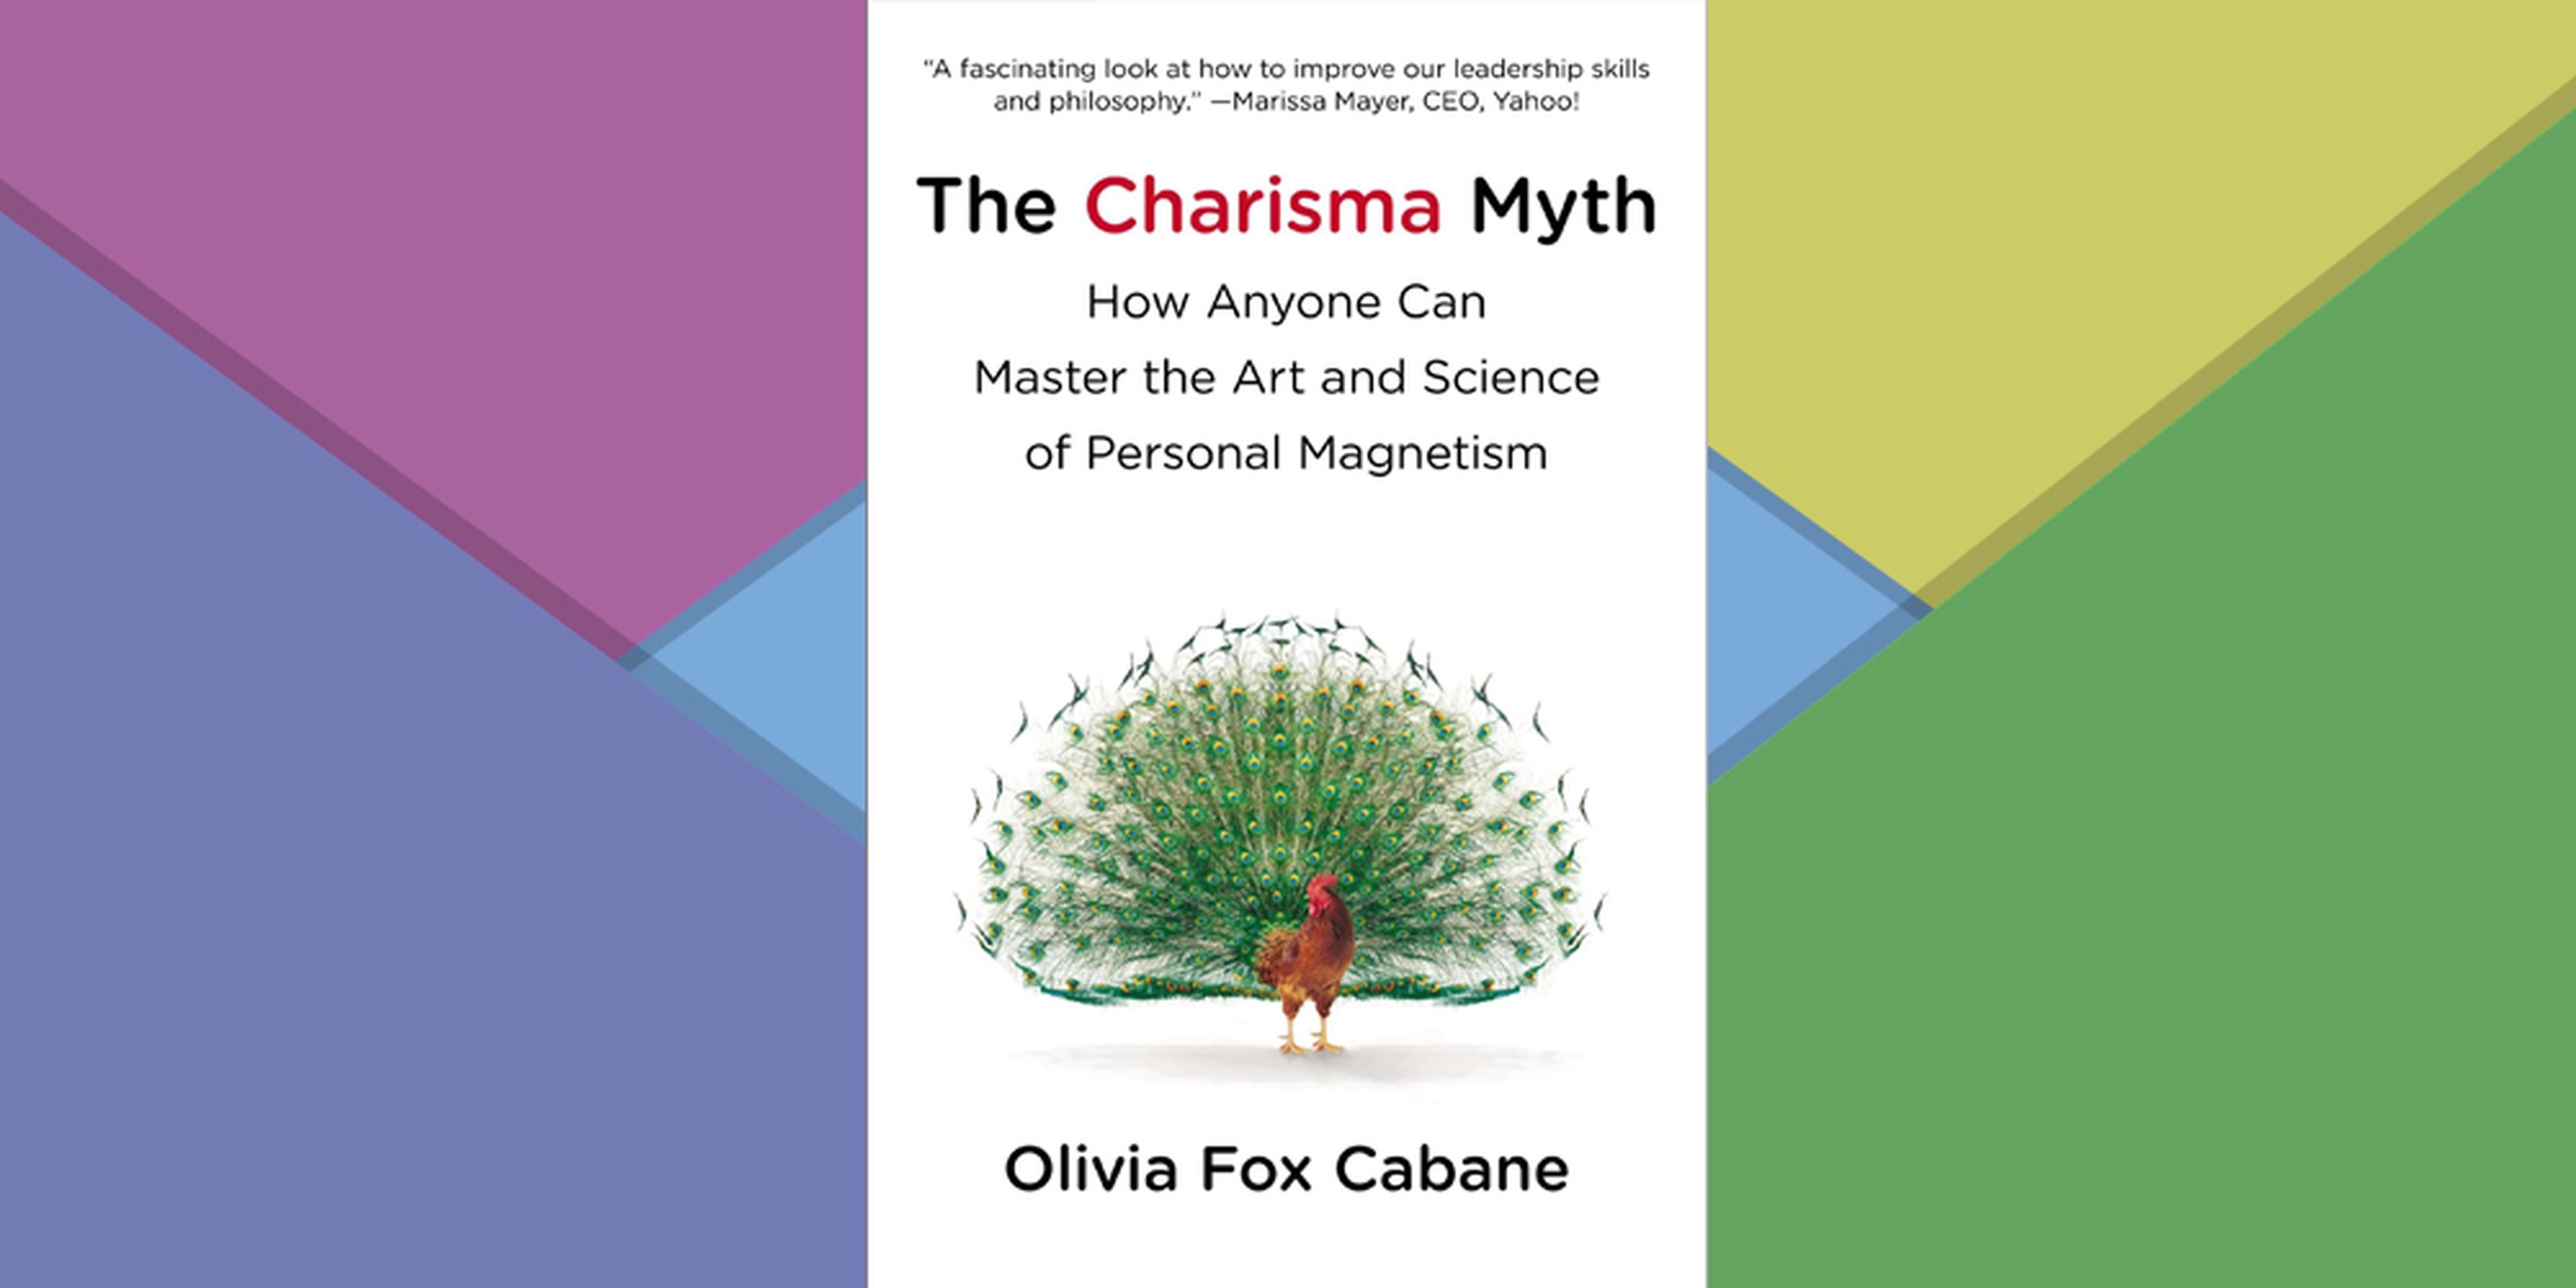 Marissa Mayer, Laura Lang: "The Charisma Myth: How Anyone Can Master the Art and Science of Personal Magnetism"